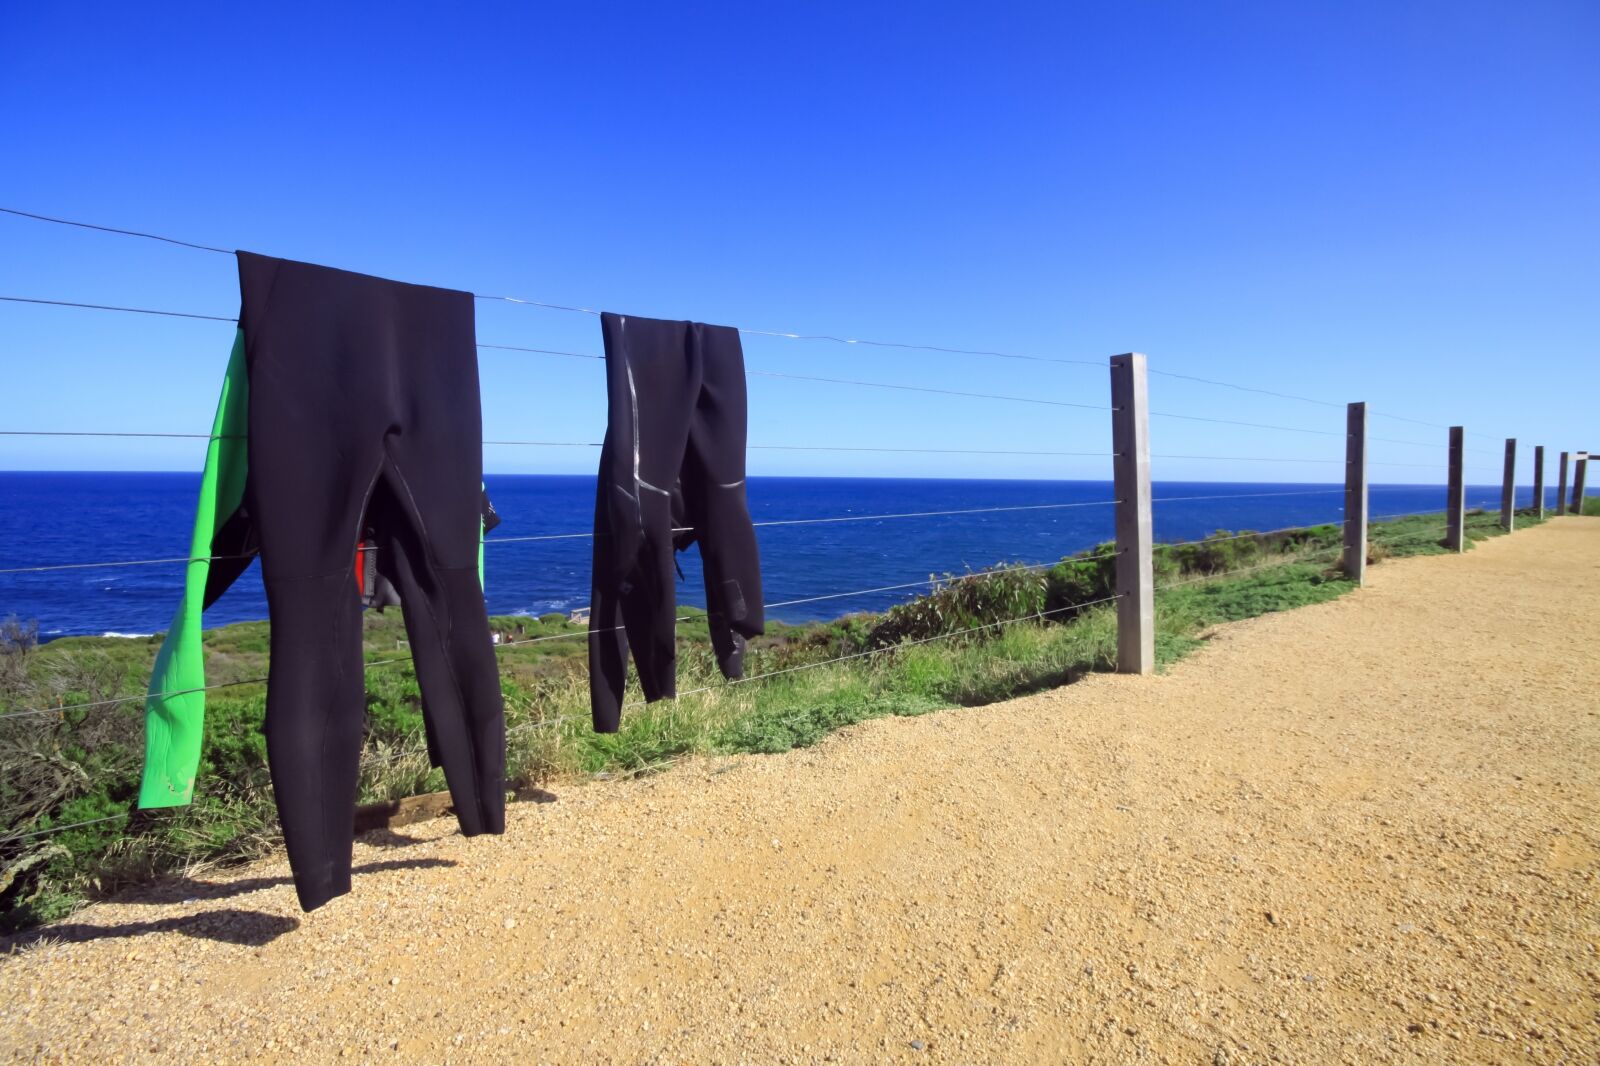 Wet Suits Drying Out in the Sun